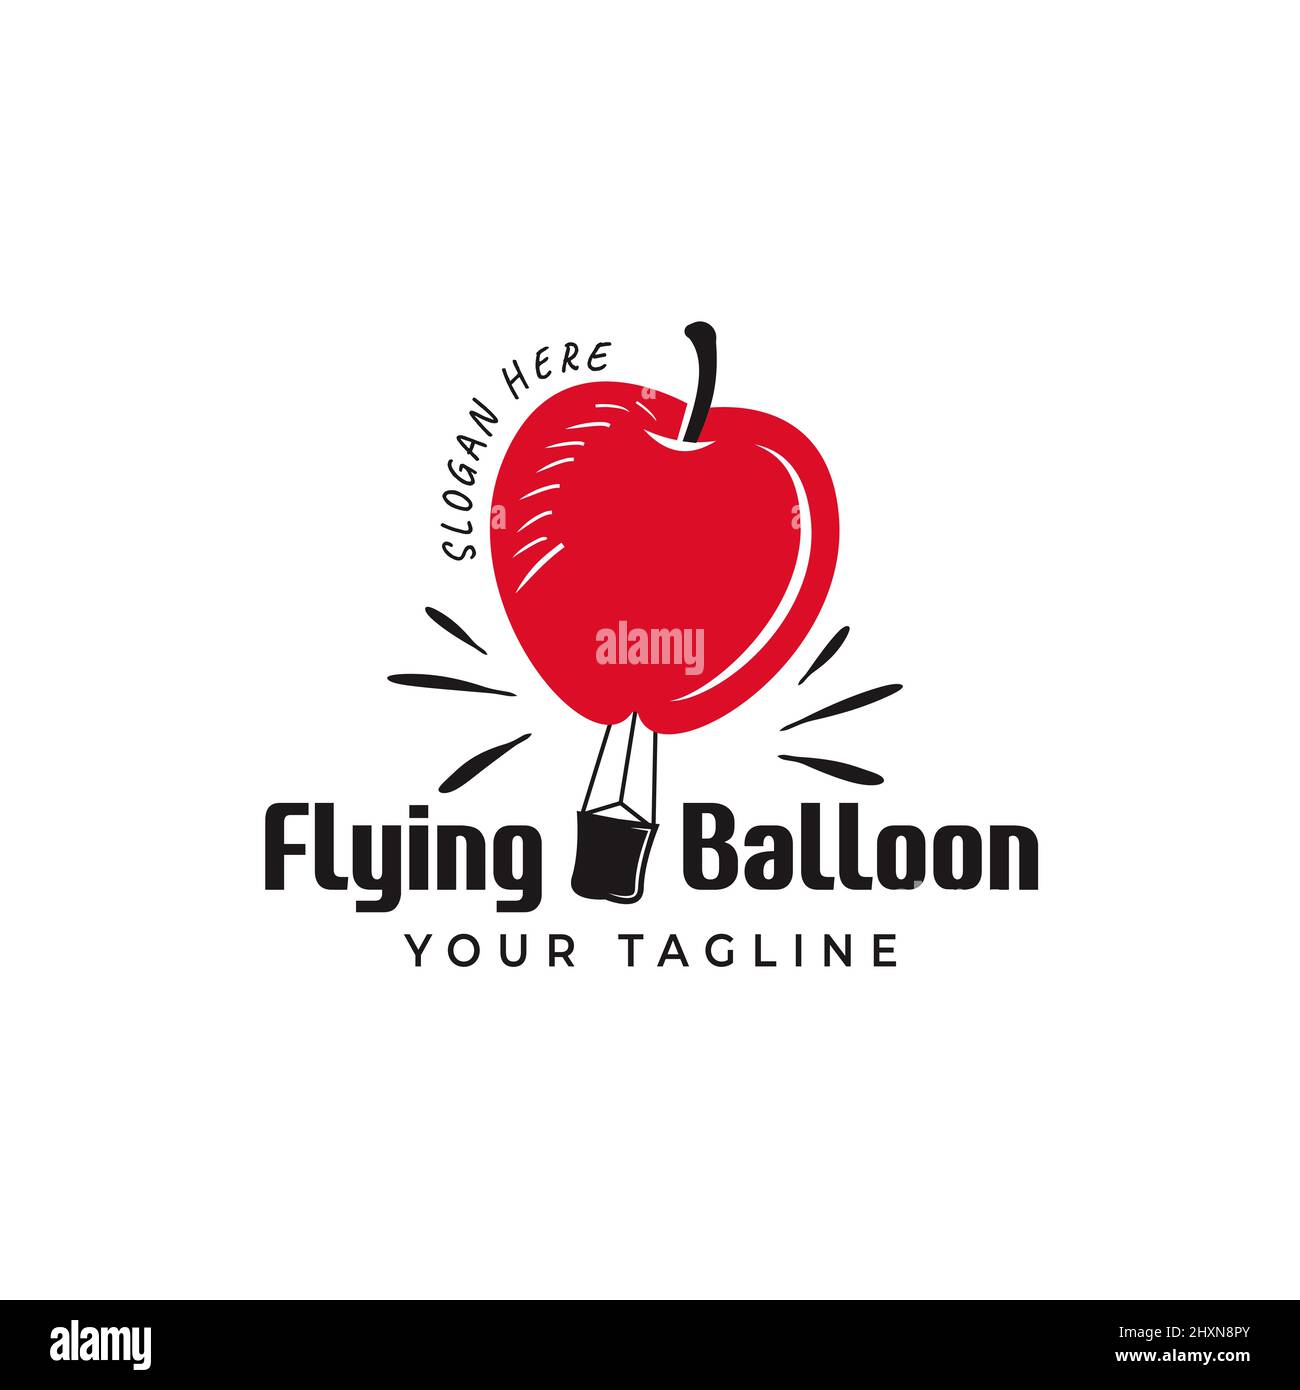 Flying balloon illustration logo Red apple flying in the air unique. Stock Vector